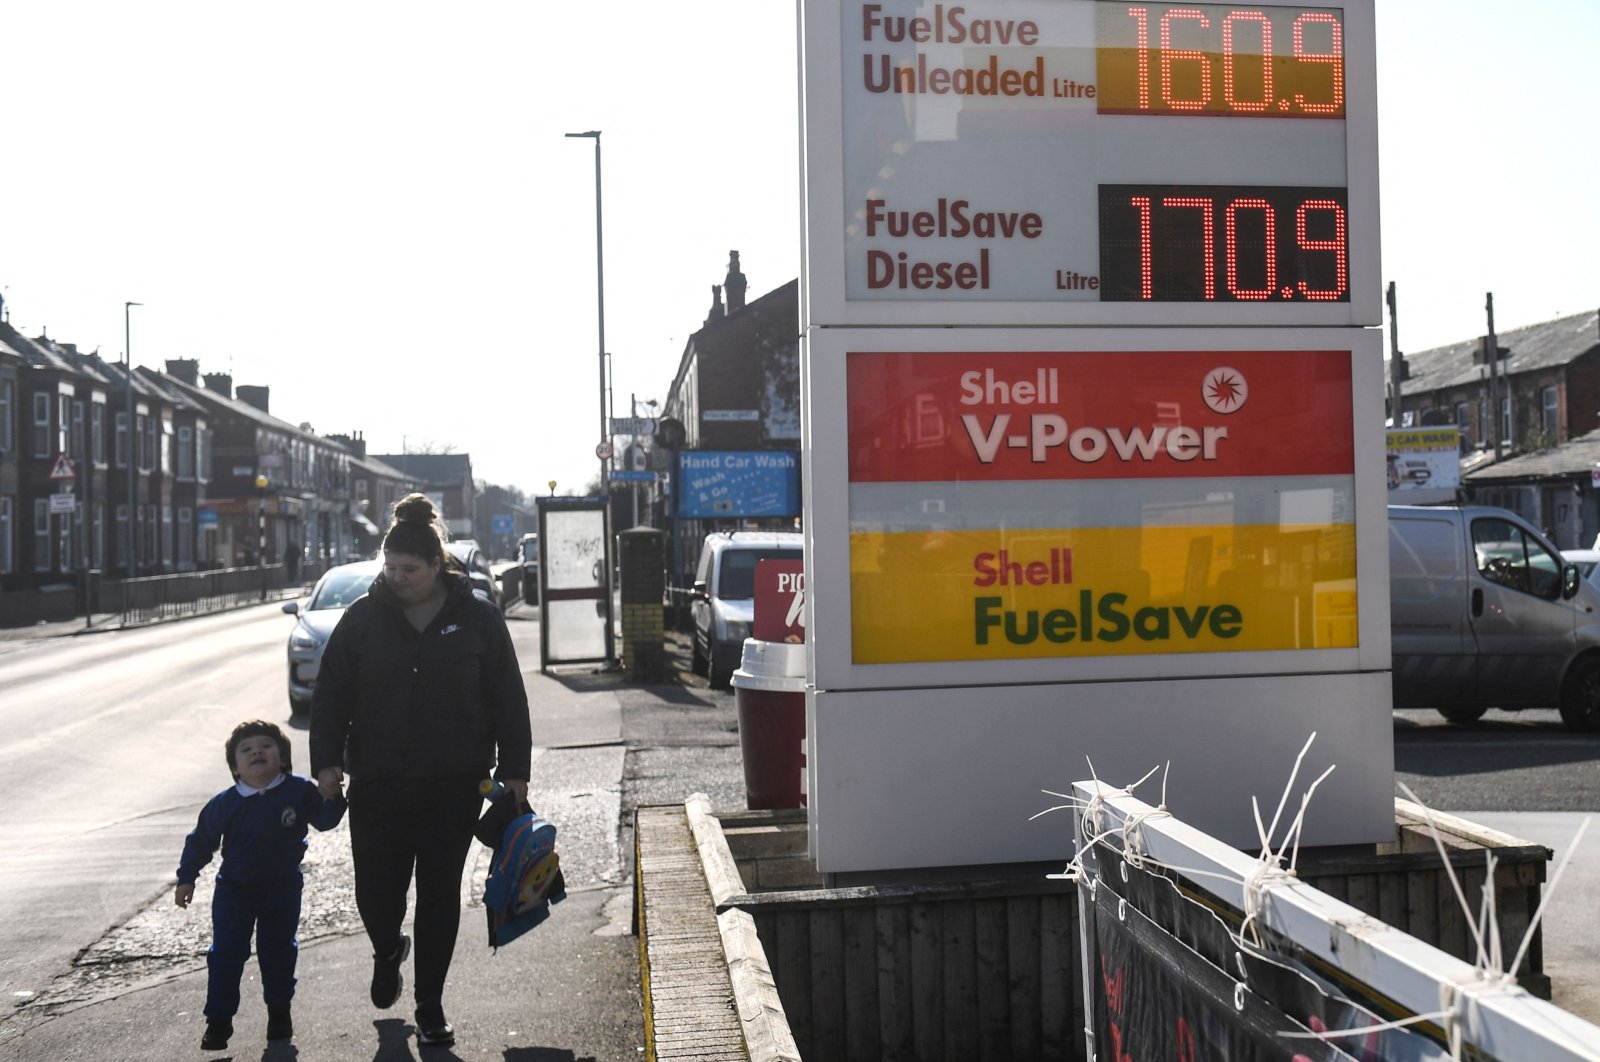 People walk past a board indicating the prices of petrol and diesel fuel at a Shell petrol station, in Manchester, U.K., March 8, 2022. (AFP Photo)